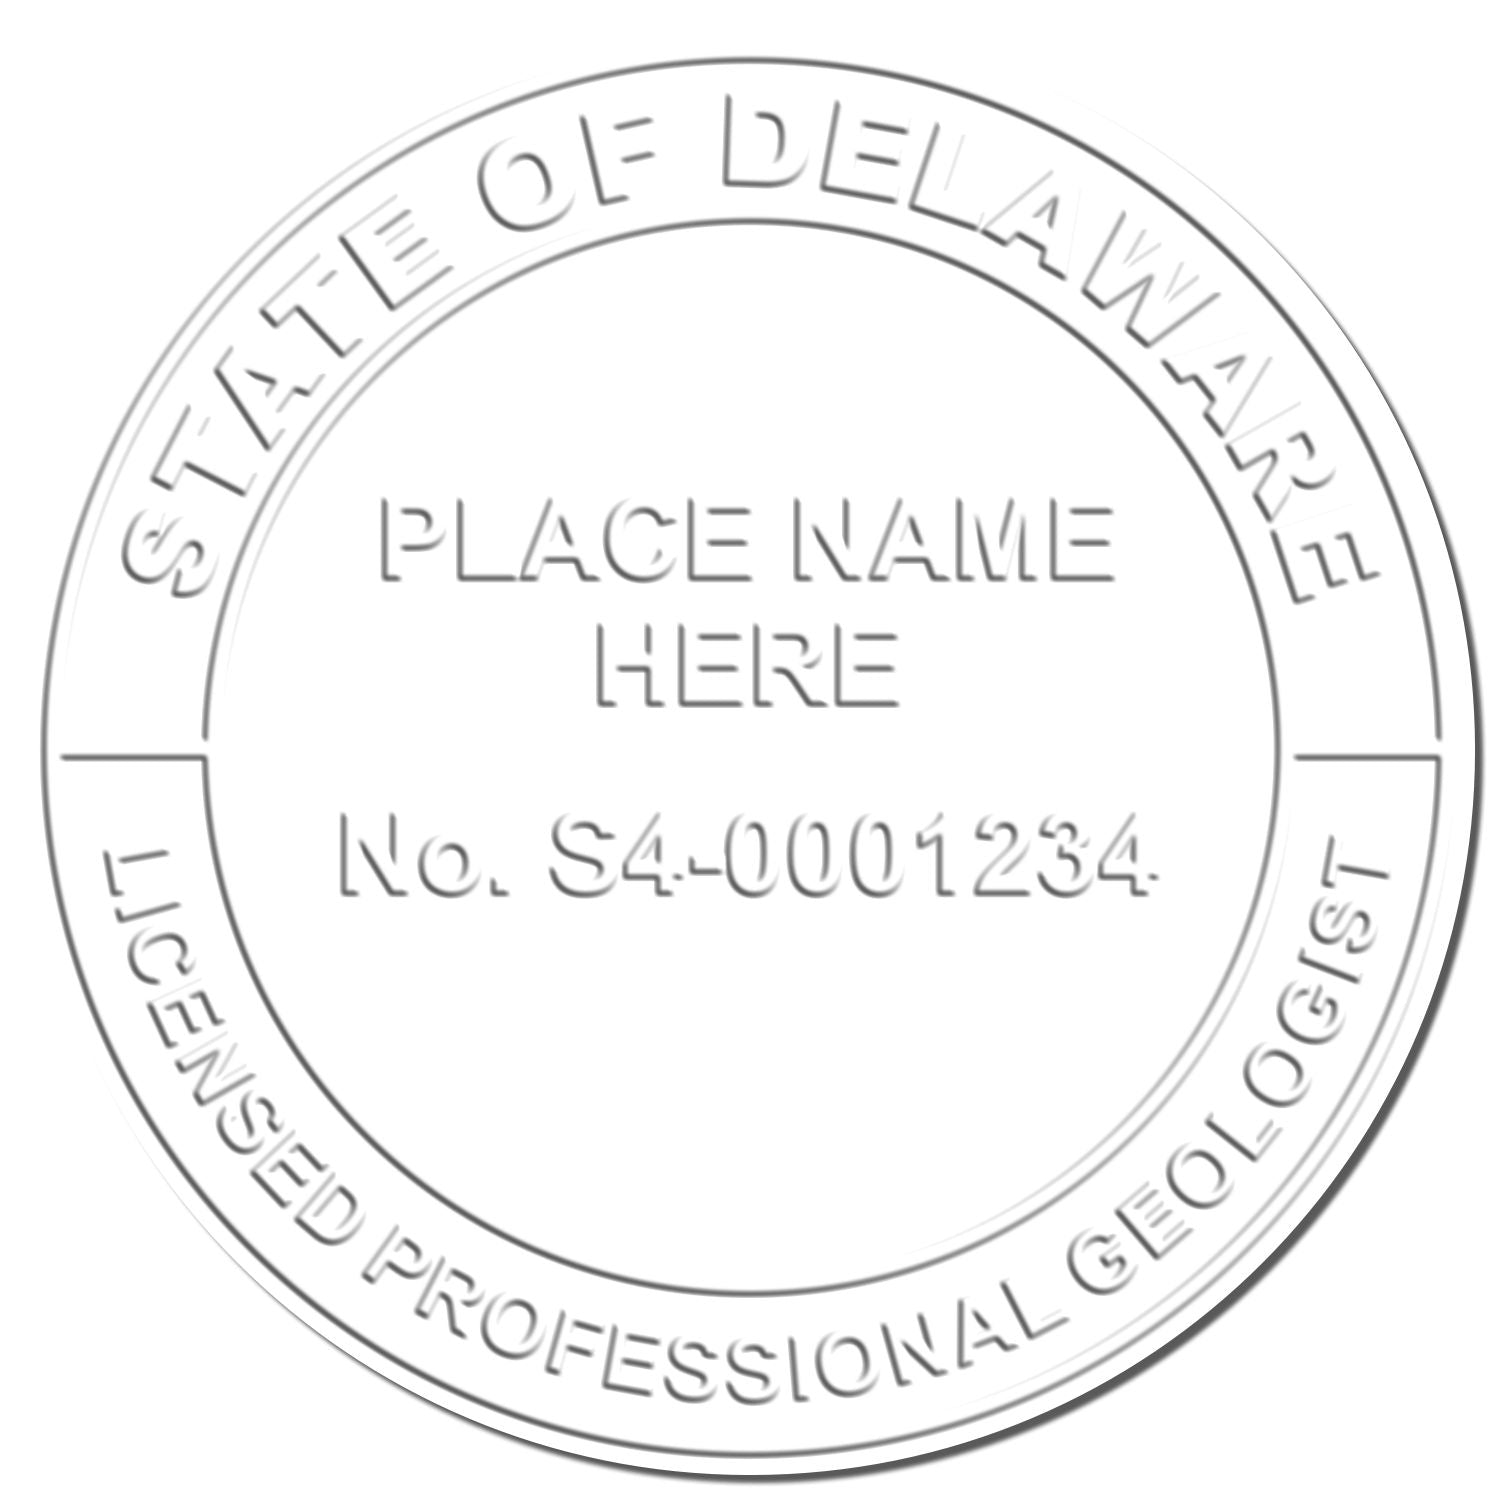 A stamped imprint of the Soft Delaware Professional Geologist Seal in this stylish lifestyle photo, setting the tone for a unique and personalized product.